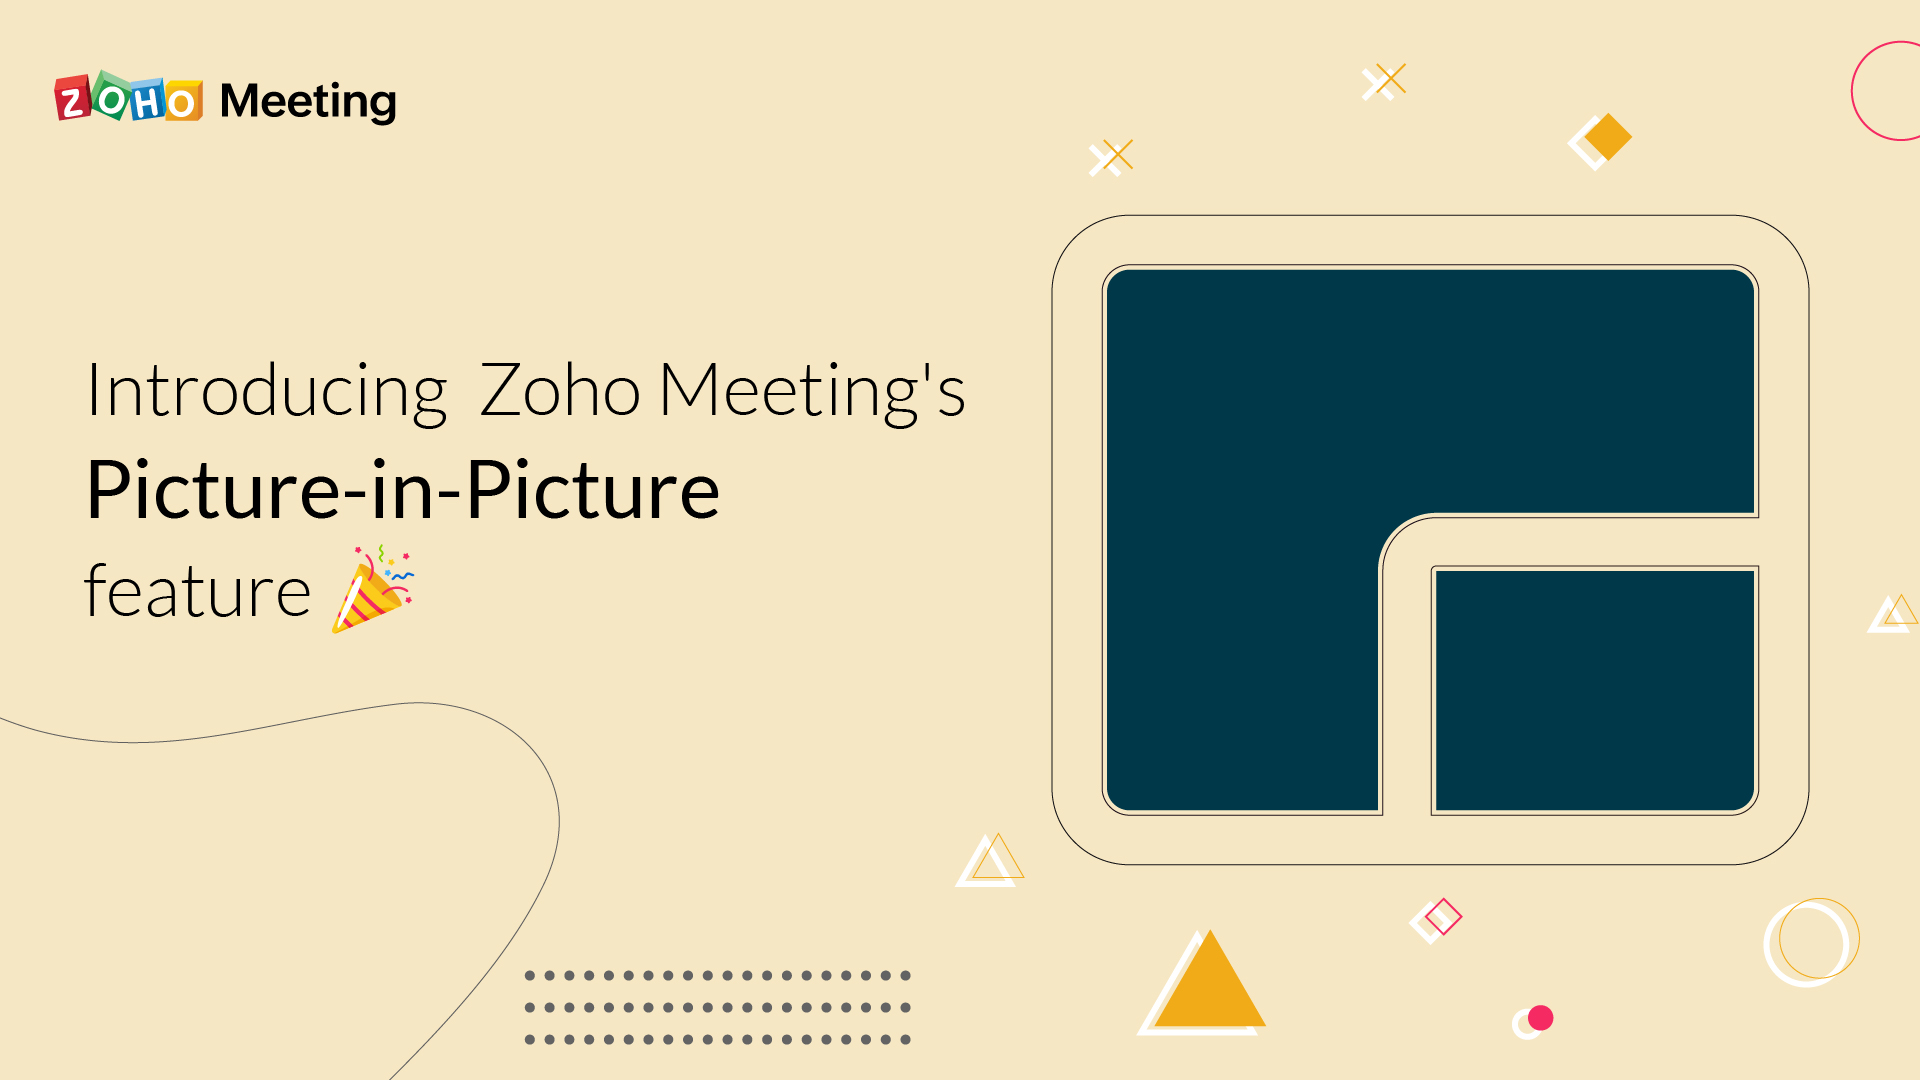 Introducing Zoho Meeting’s Picture-in-Picture feature